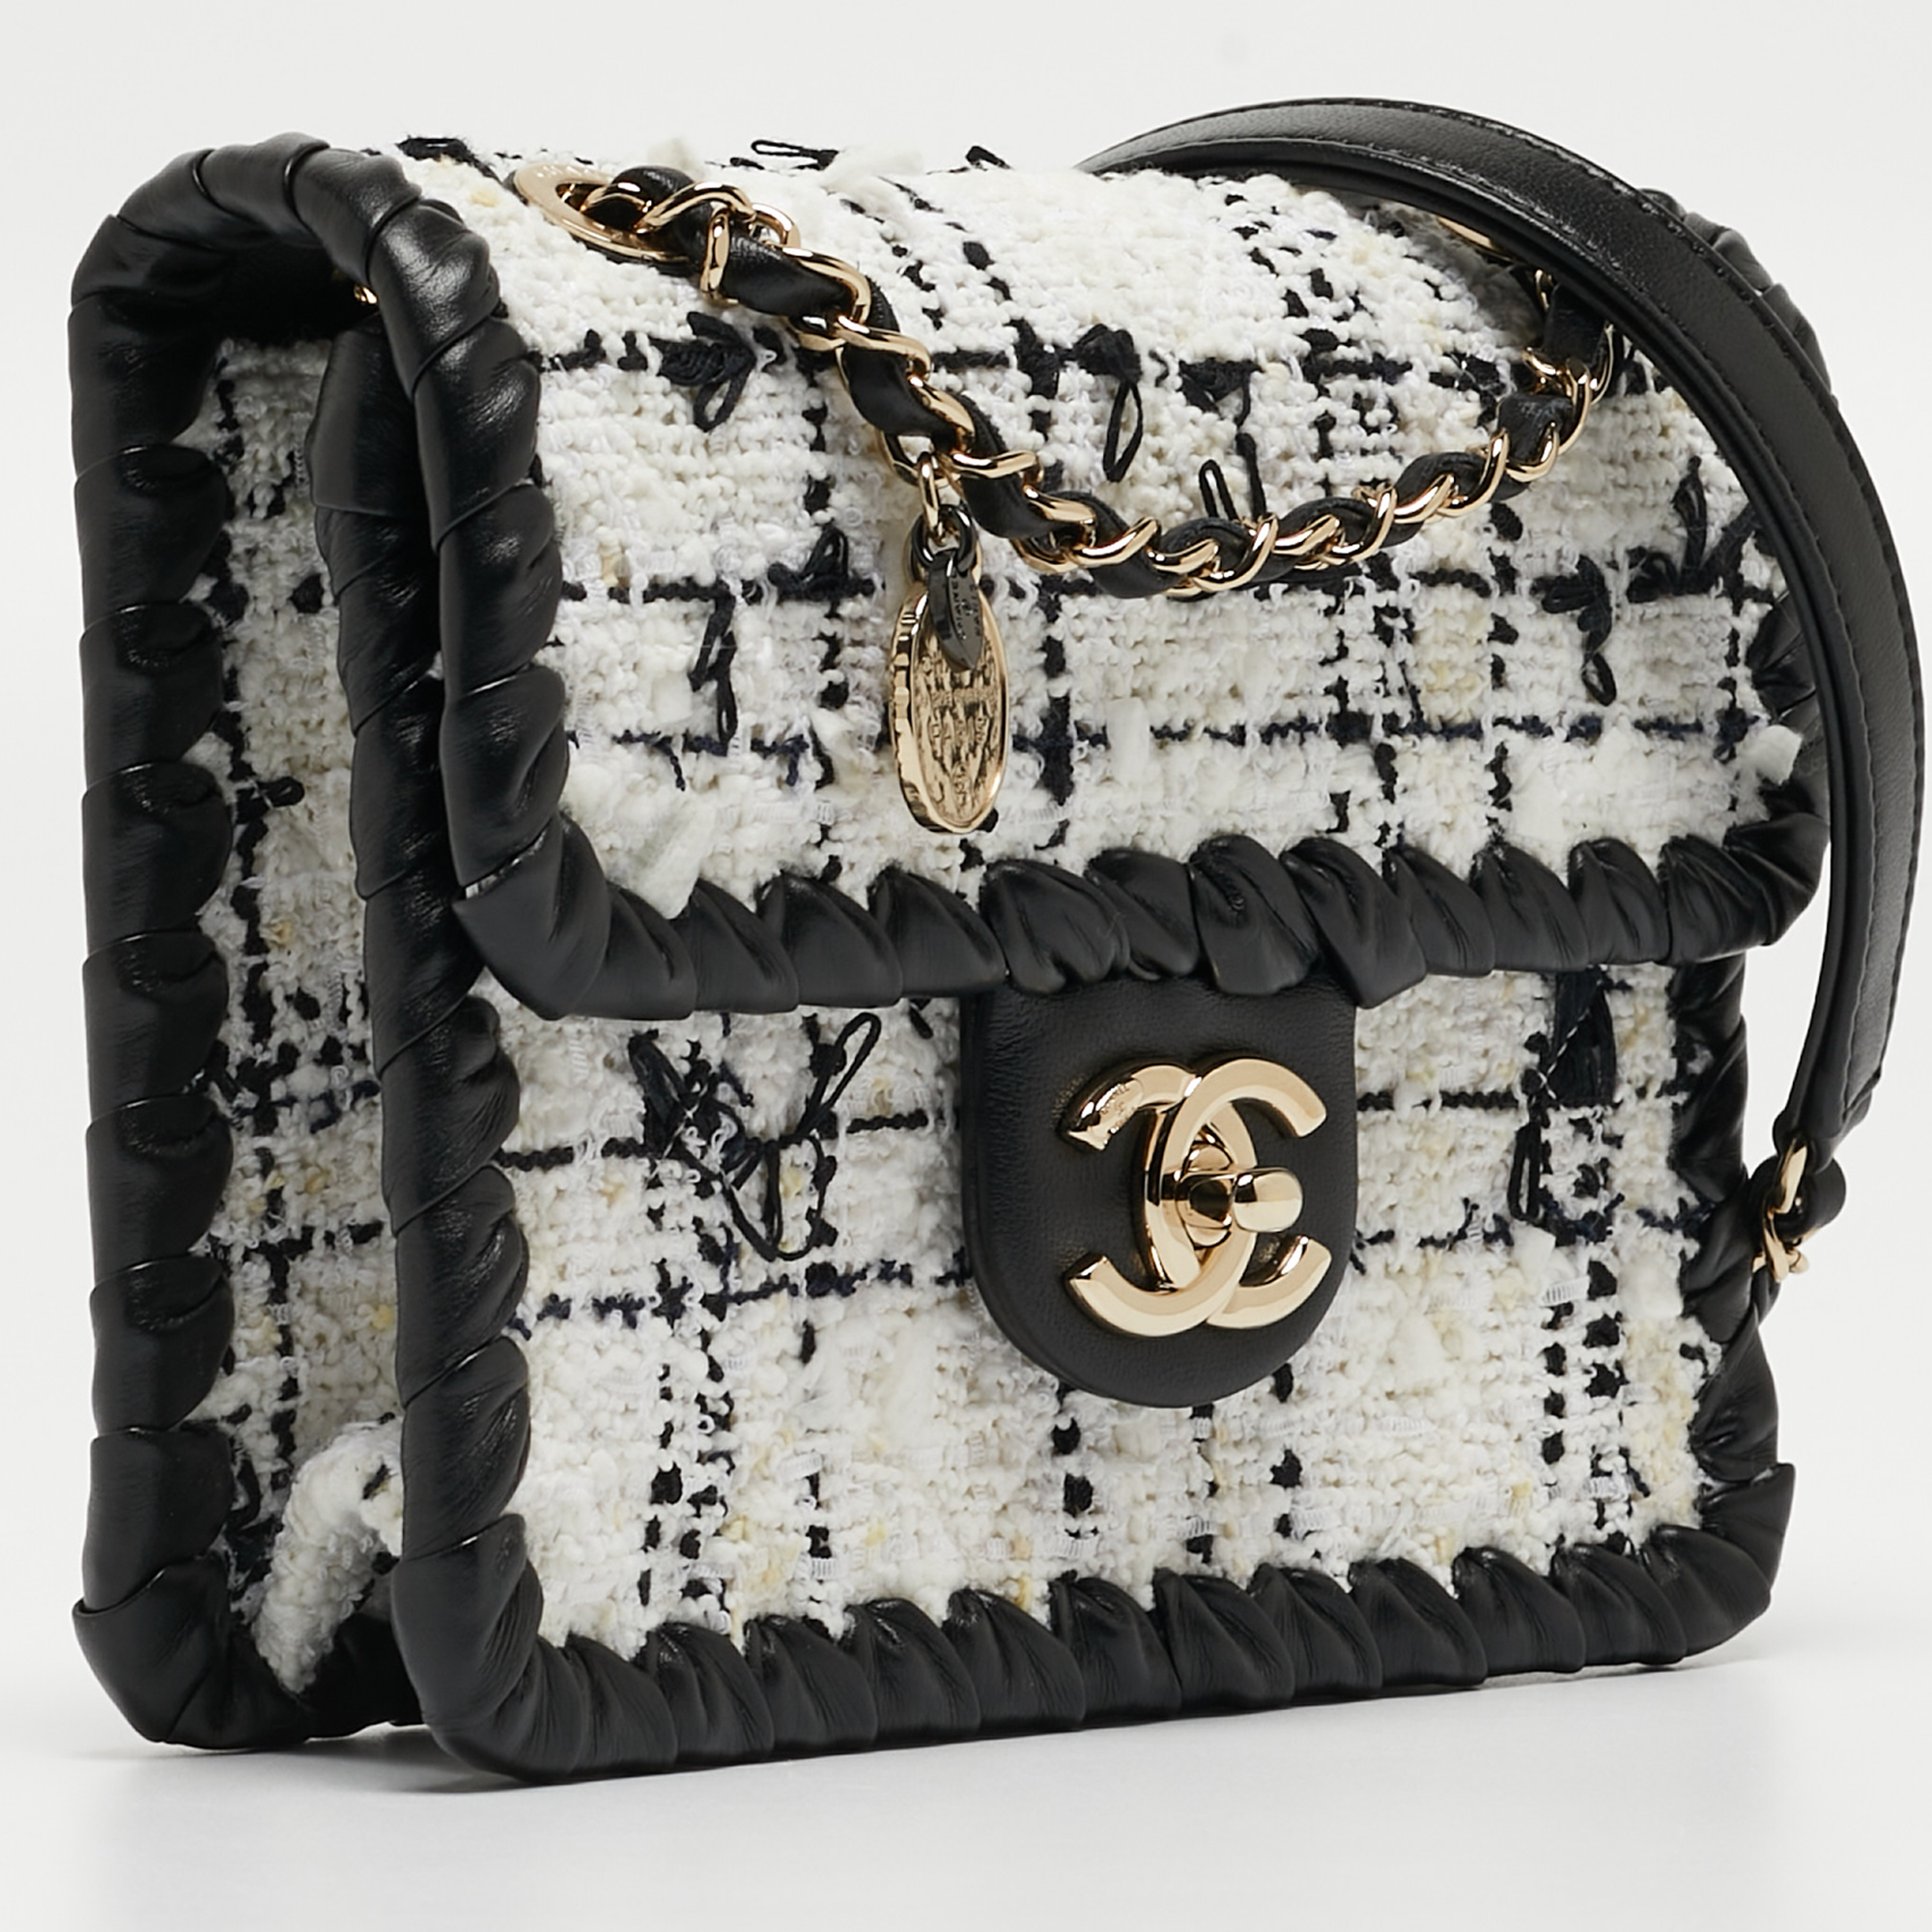 Chanel Black/White Tweed And Leather Mini My Own Frame Flap Bag